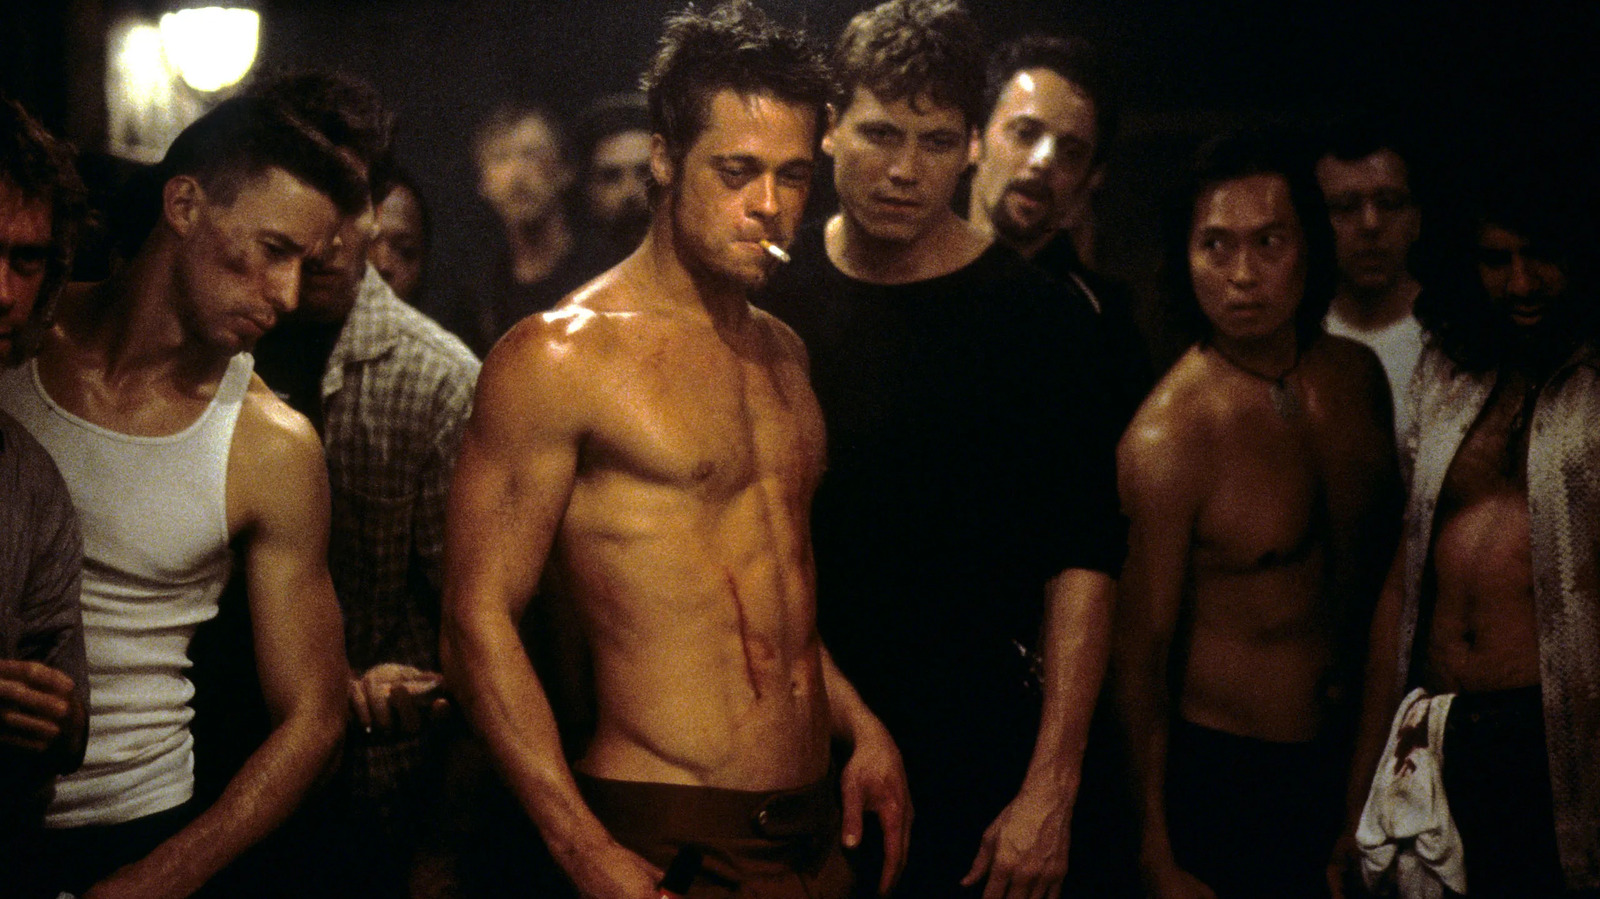 The Coming-Of-Age Romantic Comedy That Inspired Fight Club